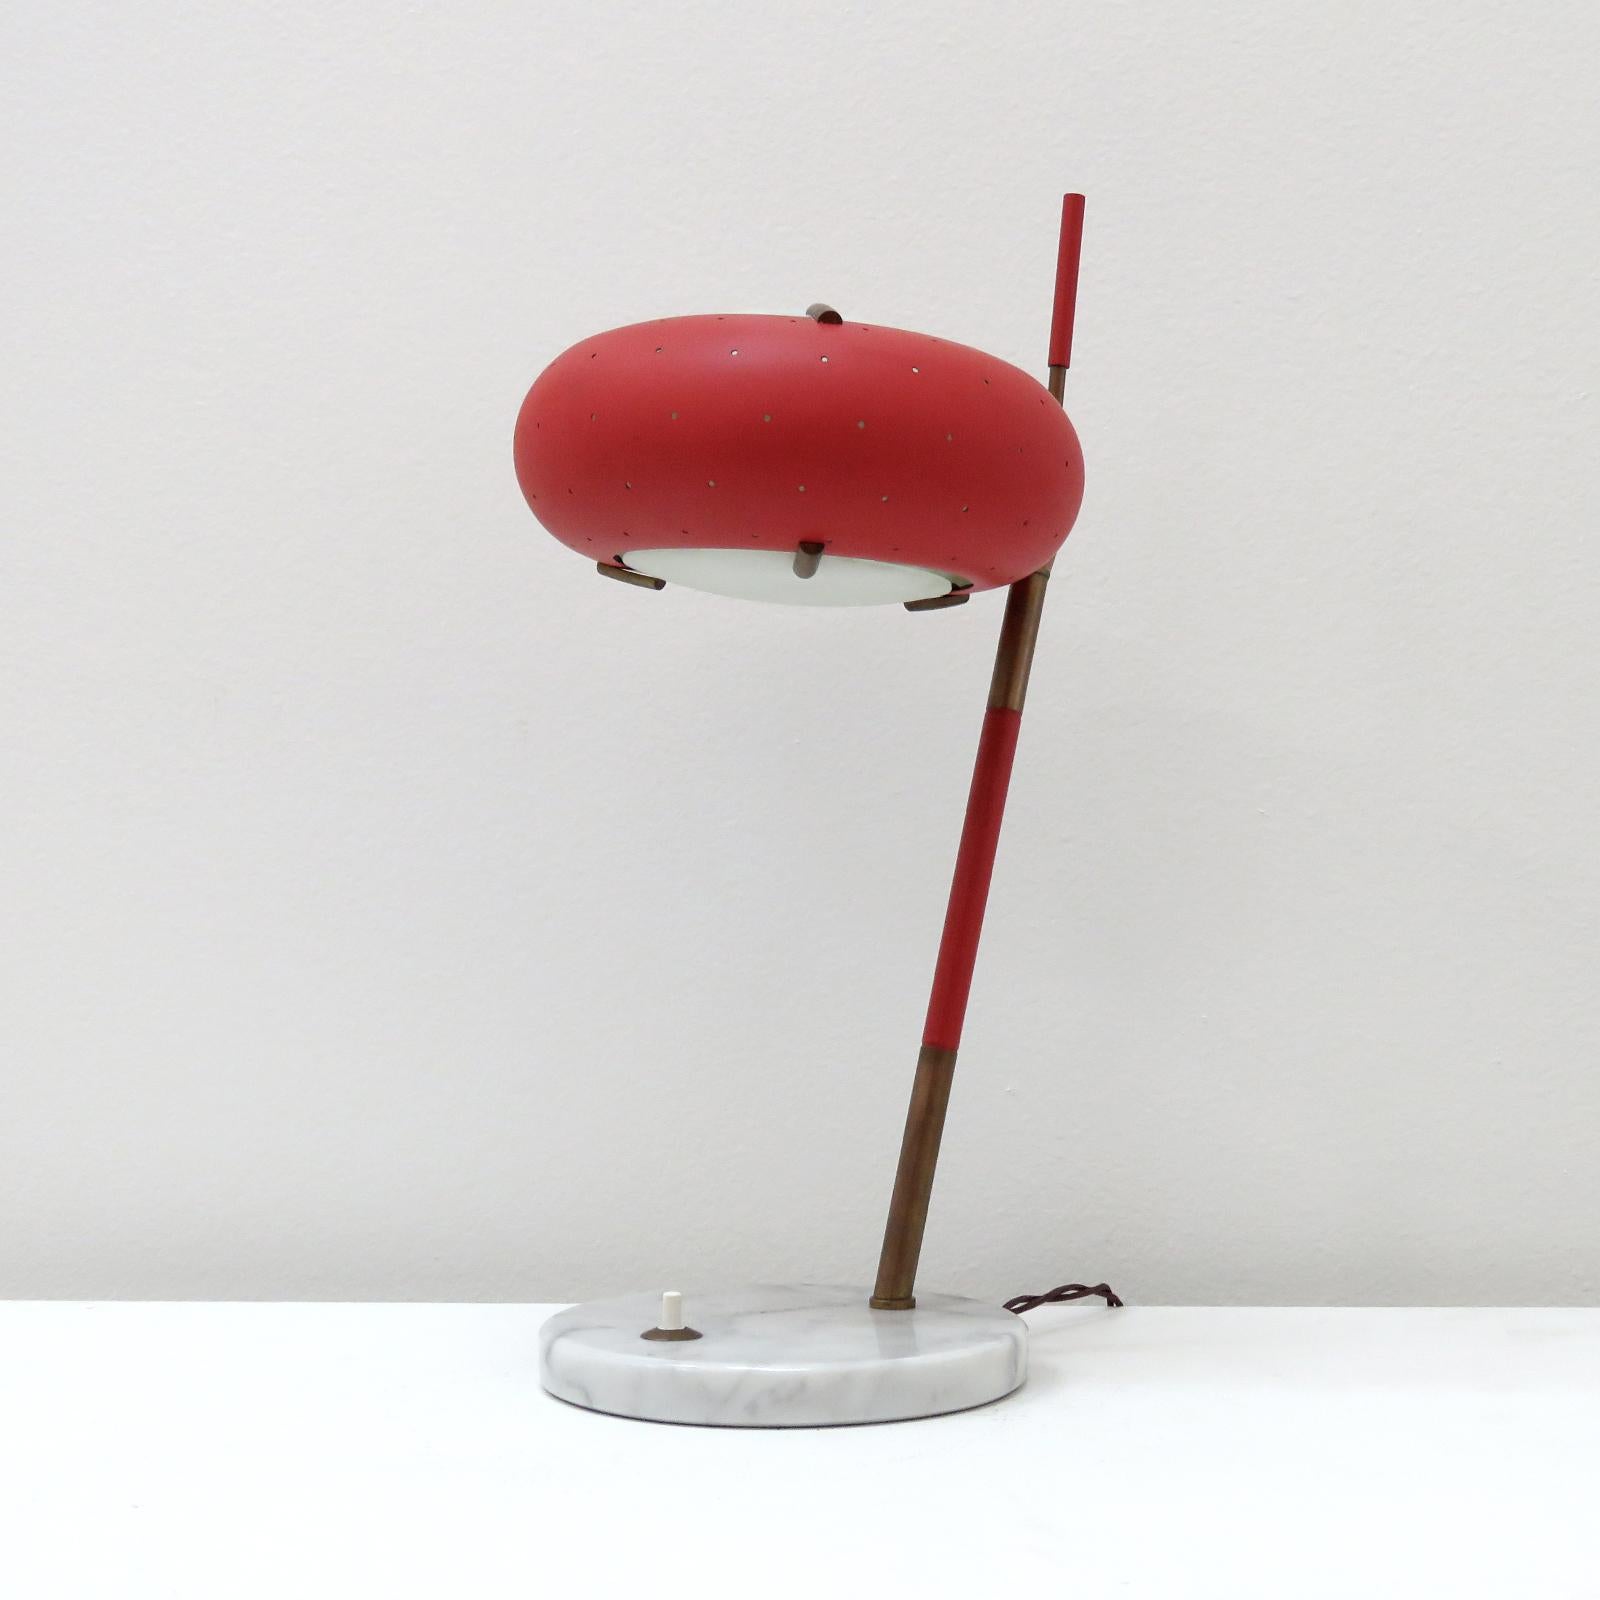 wonderful, midcentury table lamp by Stilux Milano, Italy, with patinaed, partially wrapped brass post on a Carrara marble base, with articulate, beautifully perforated red metal shade. A bottom and top diffuser of frosted glass are held in place by